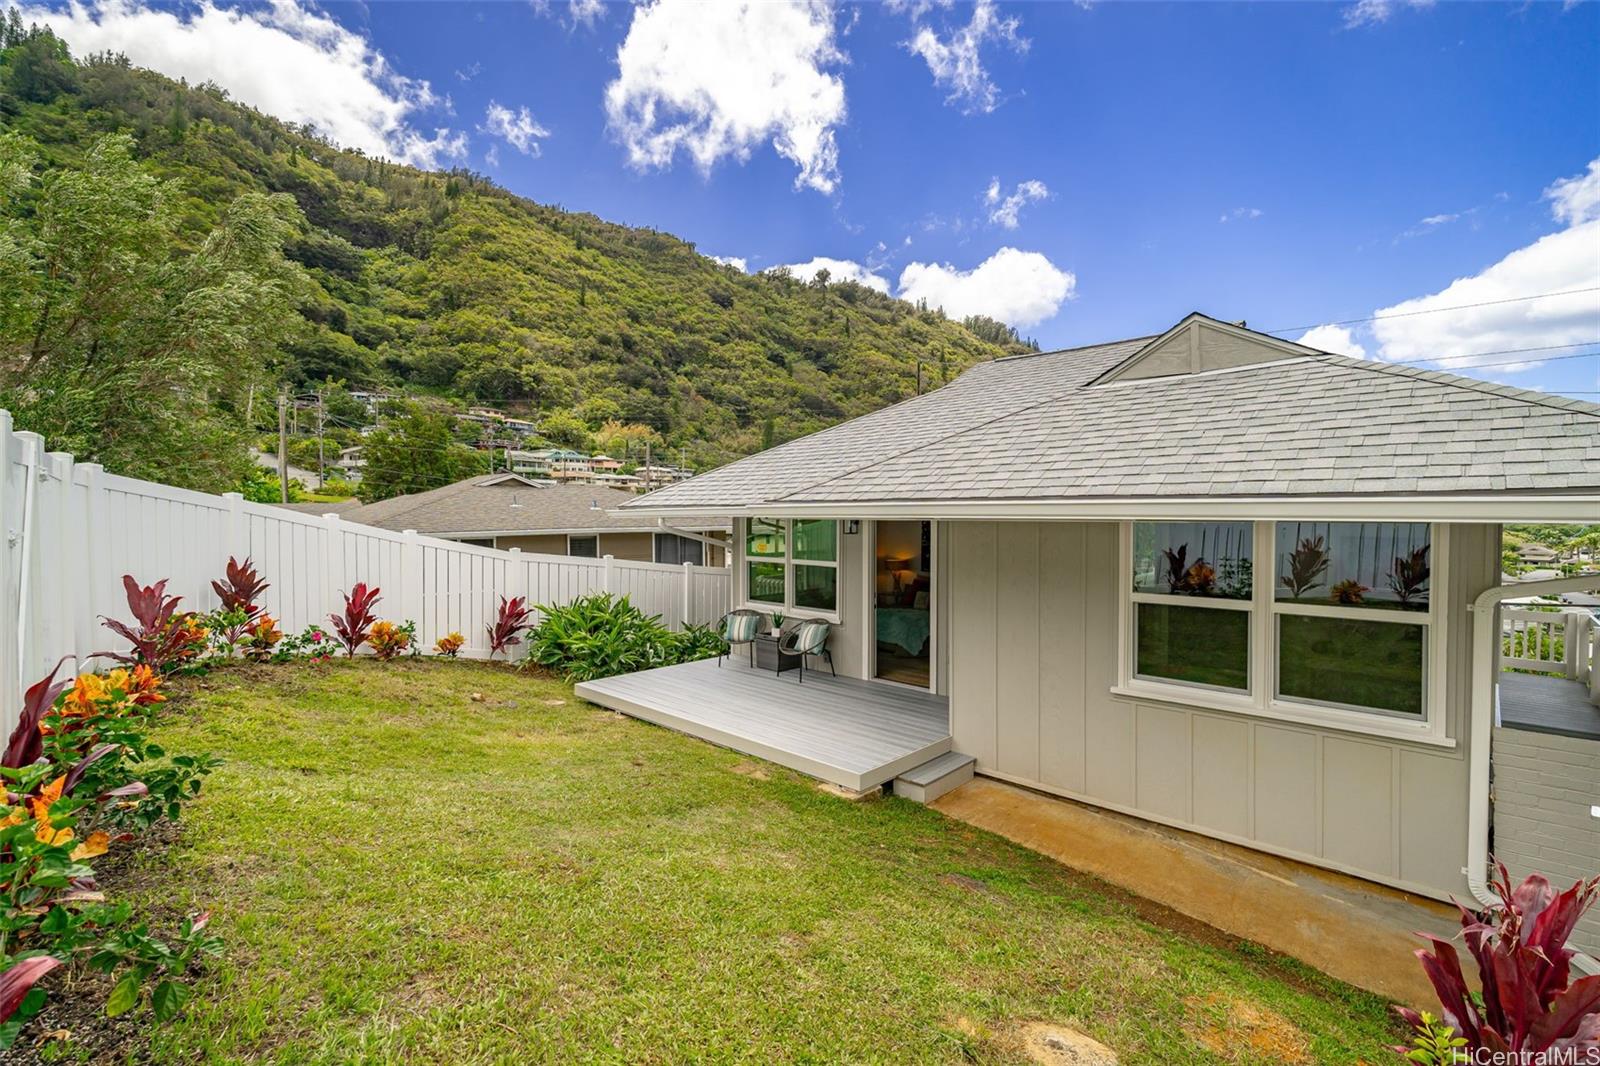 Good-sized, newly landscaped & fully fenced backyard and composite deck, from primary bedroom. Manoa Valley hillside views at back.